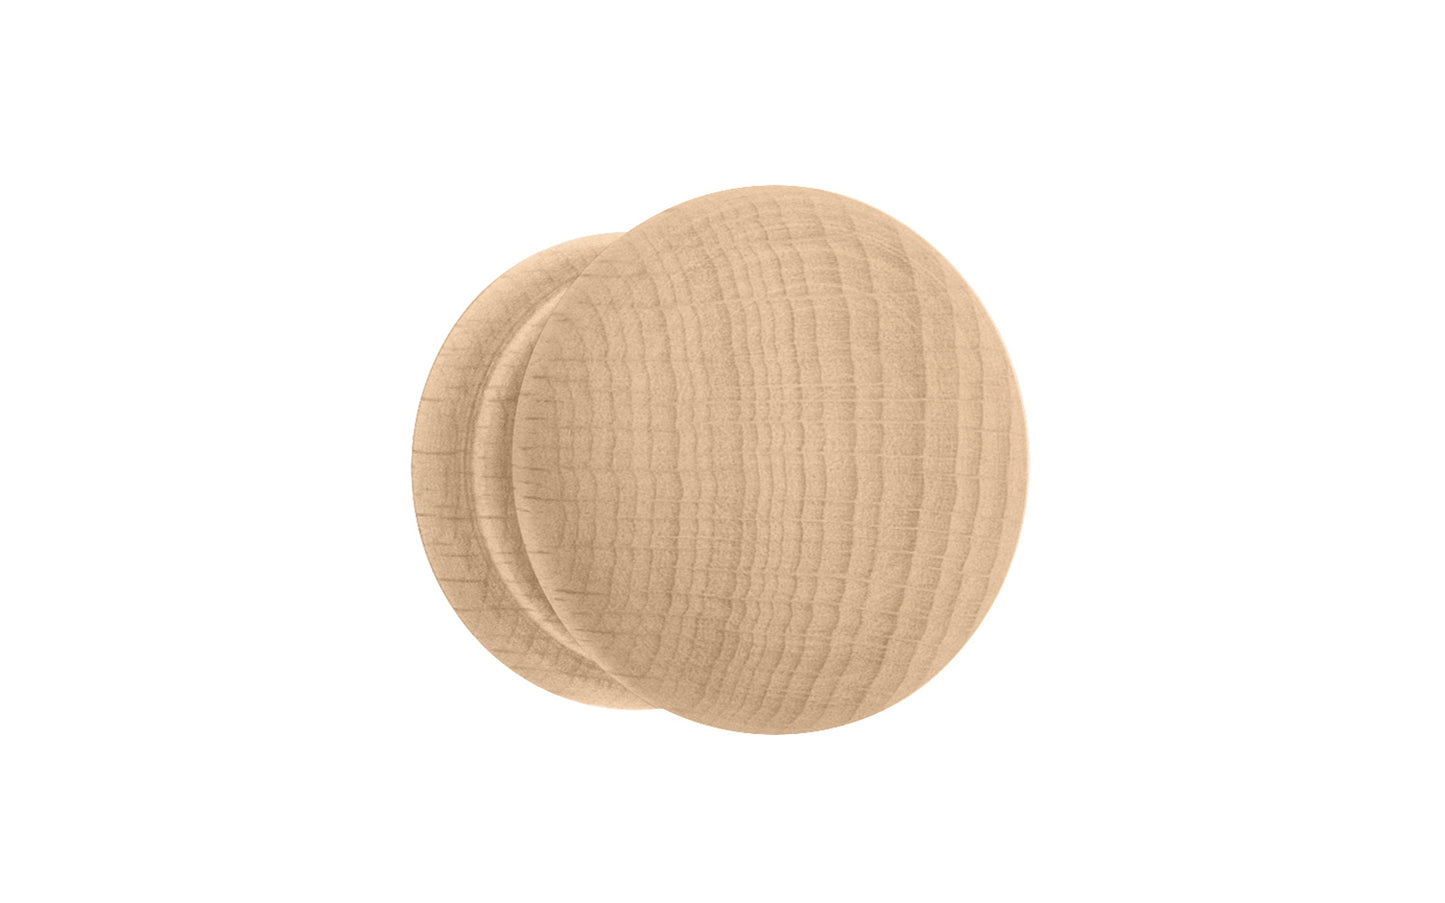 Traditional & Classic Shaker Beech Knob with Tenon. Made of unfinished solid beech wood, these wood knobs have a smooth & attractive look & feel. Wooden shaker knob for cabinets, drawers, & furniture. Old style Beechwood Shaker Knob. Wood Shaker Cabinet Knob. 1-3/8" diameter size knob.